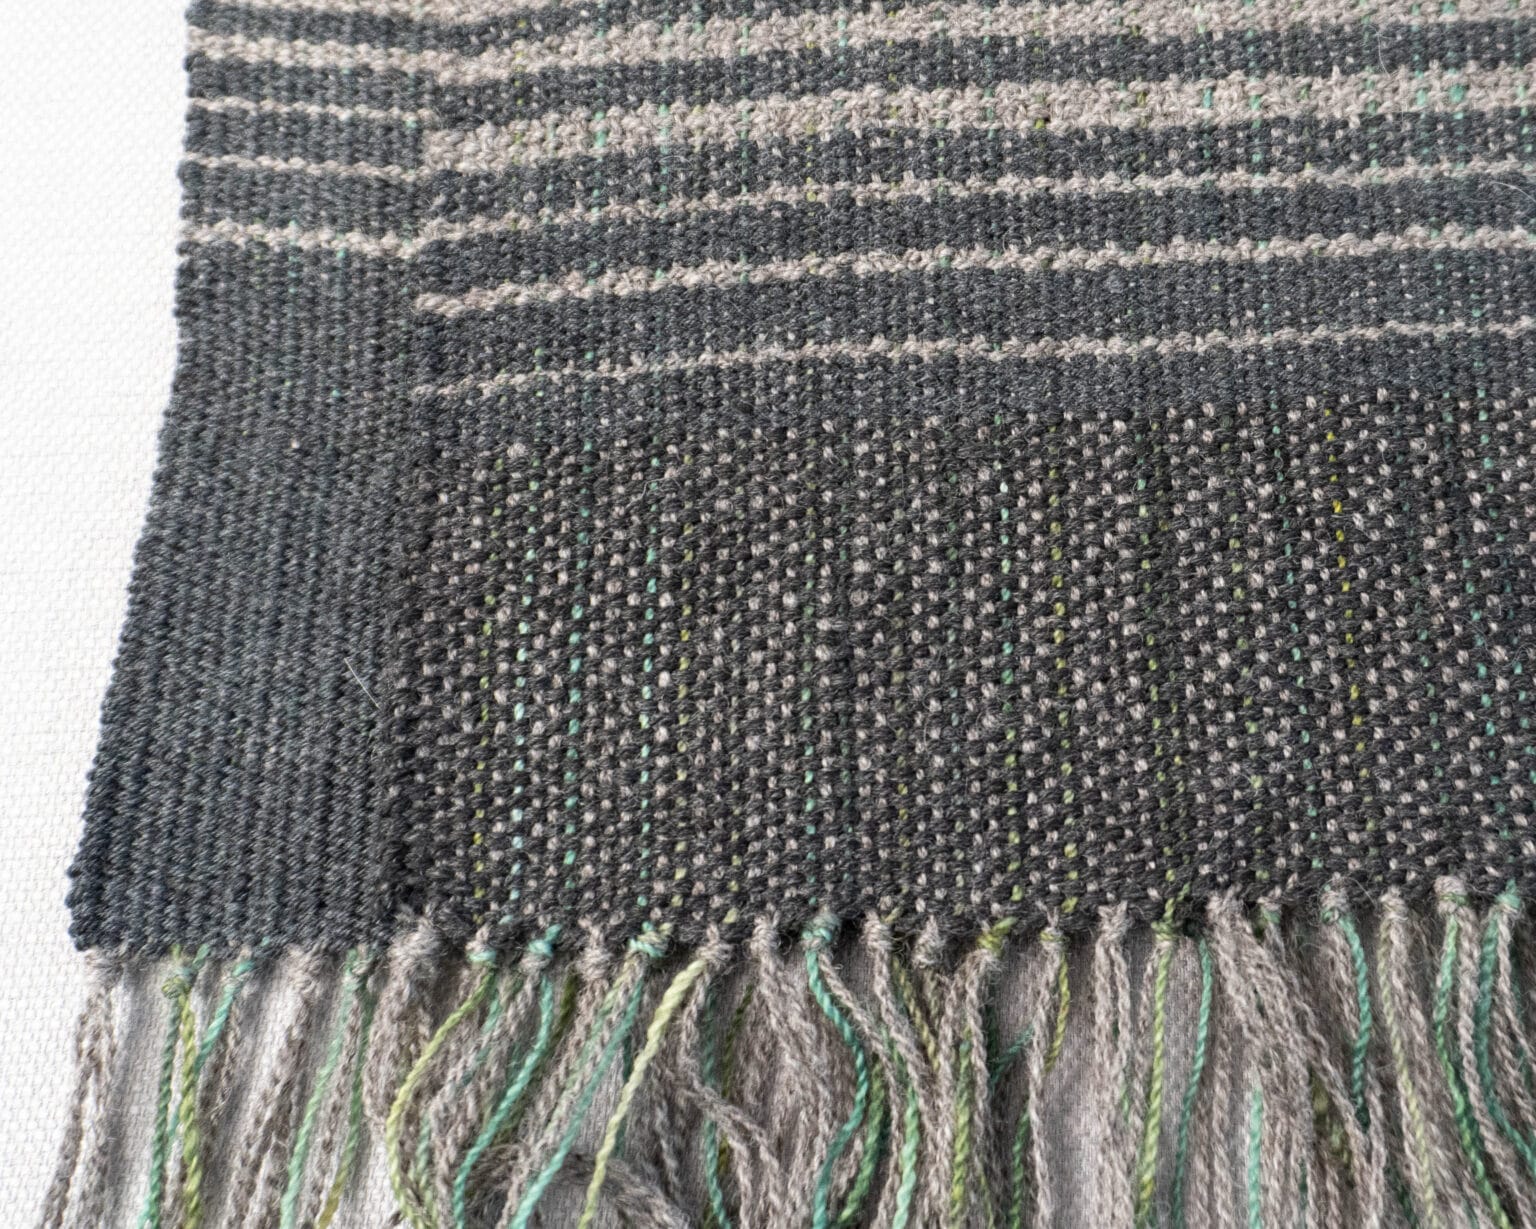 How to Plan a Weaving Project with Scrap Yarn